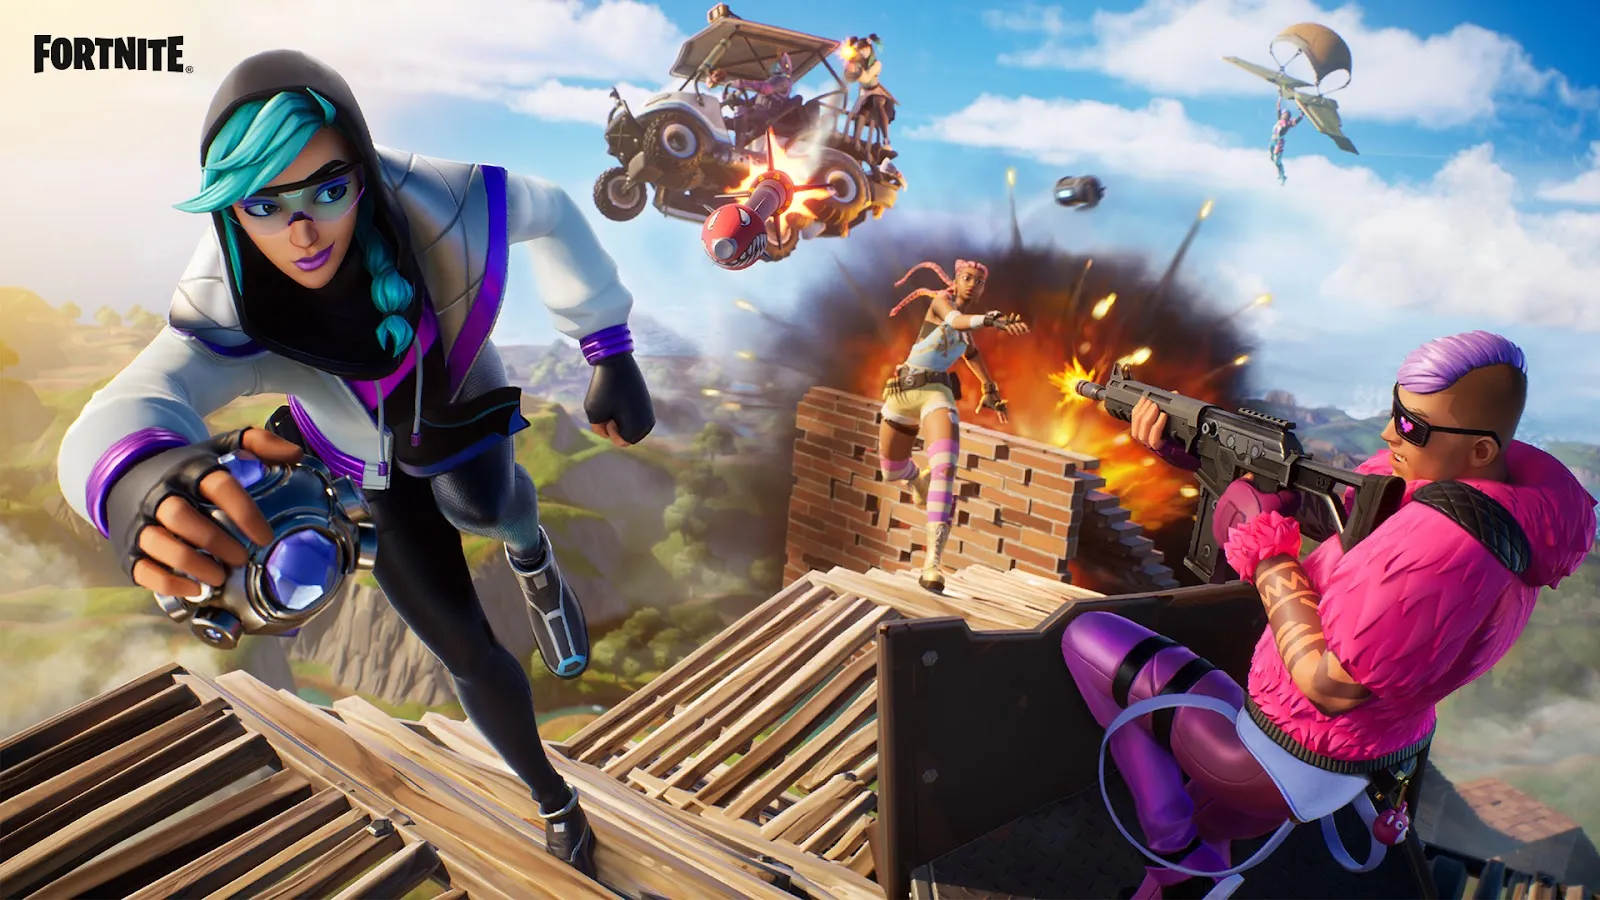 Fortnite Ranked Play is Coming to Battle Royale and Zero Build!